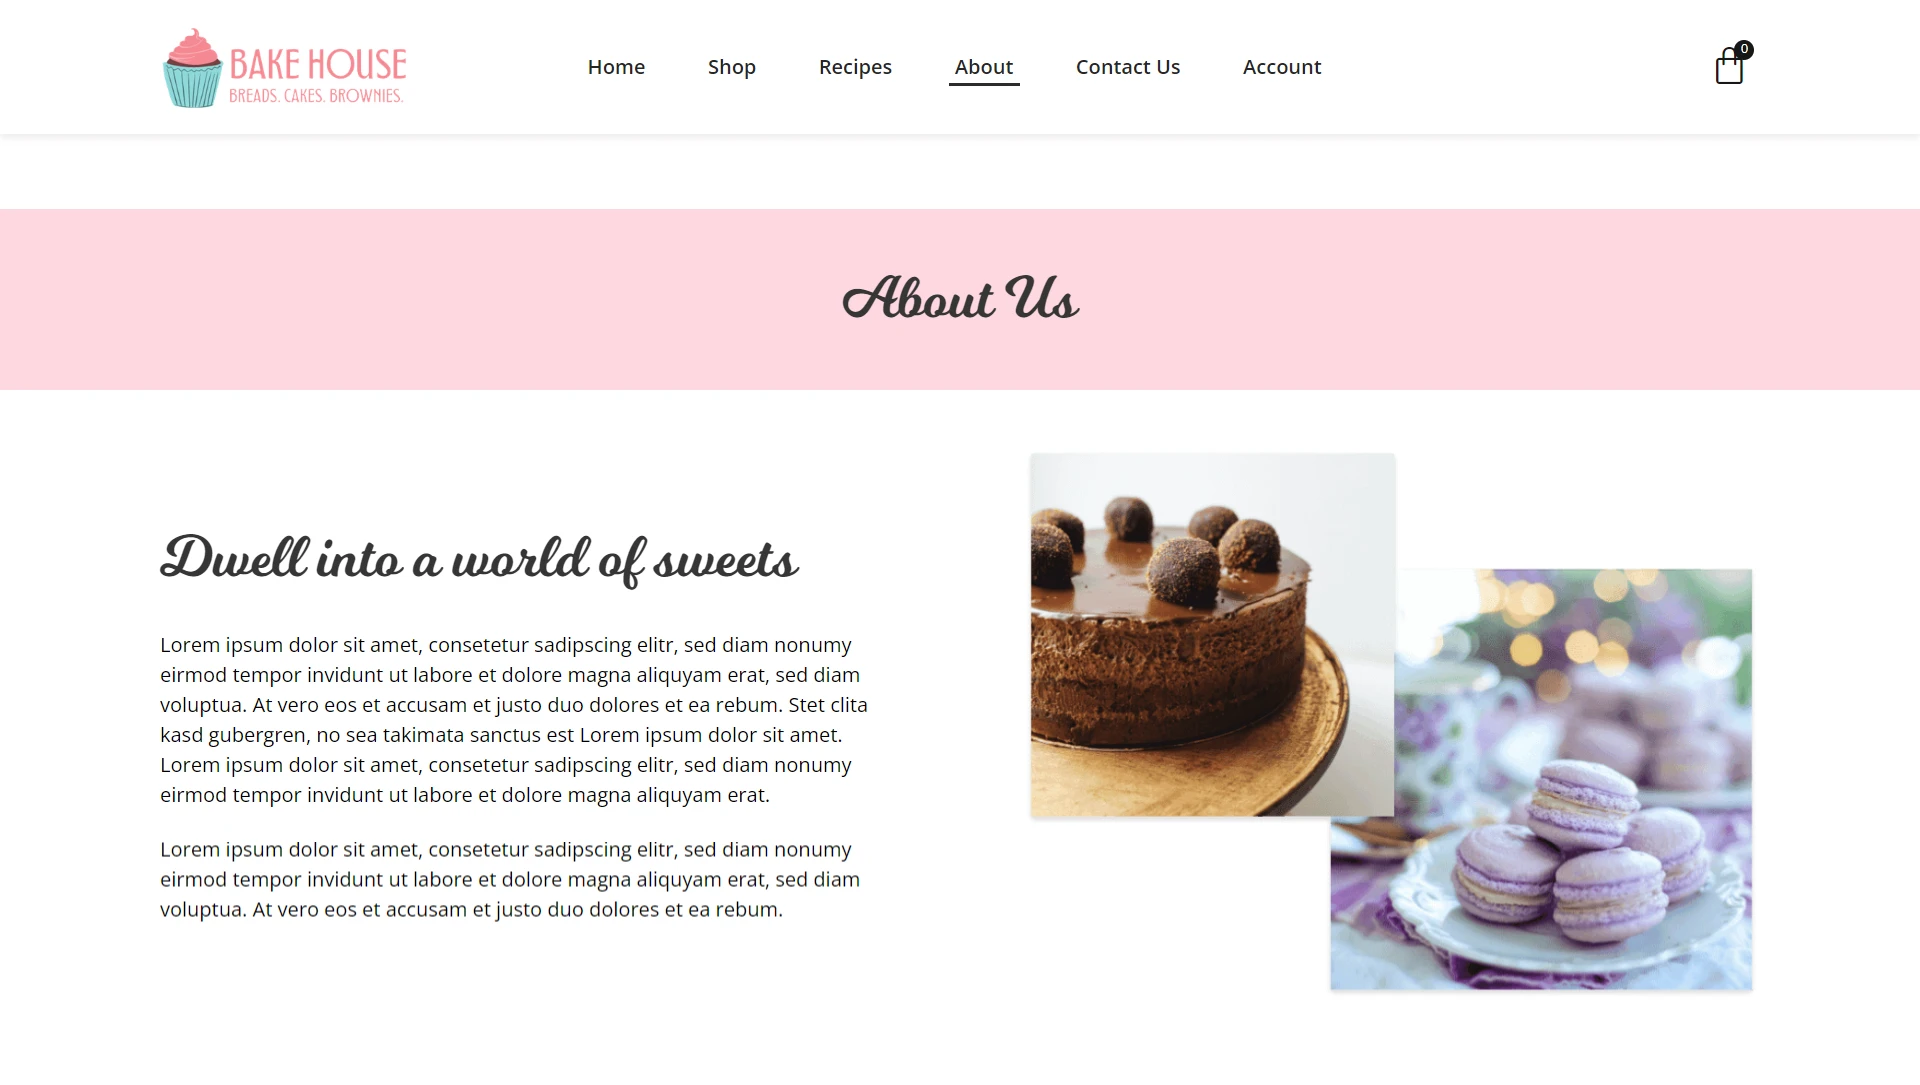 Cake Shop PSD, 3,000+ High Quality Free PSD Templates for Download